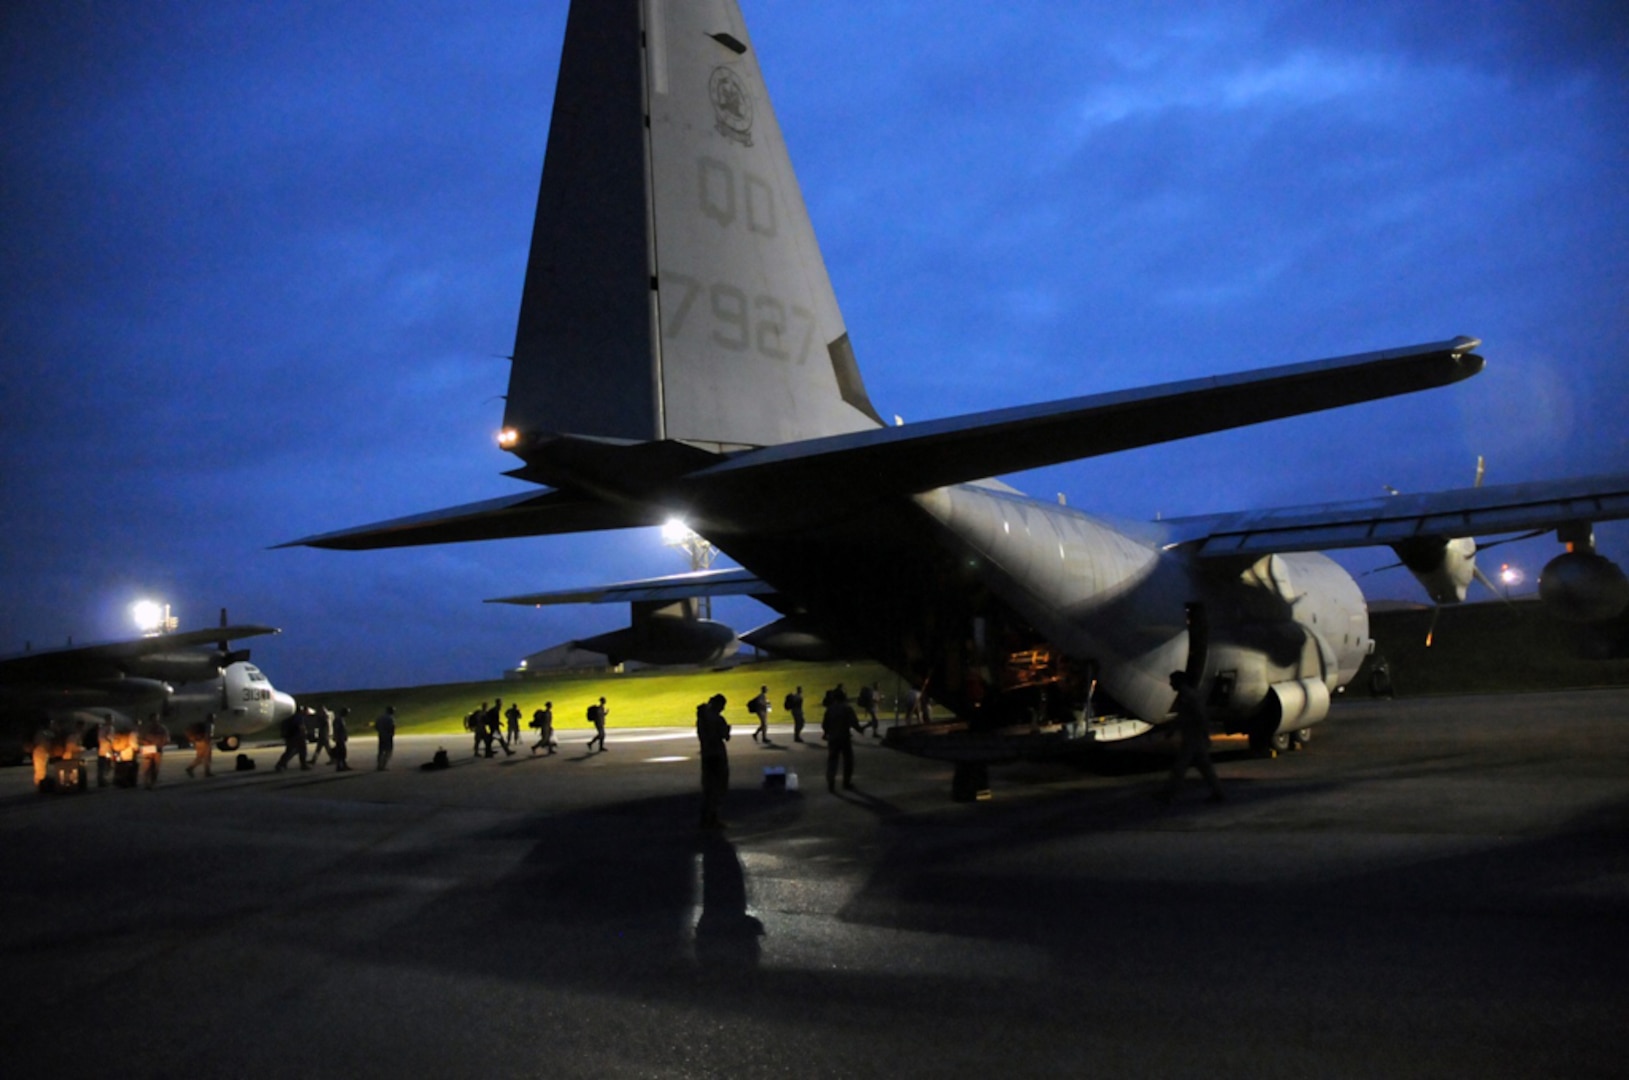 KADENA AIR BASE, Japan (Apr, 29, 2015) - Members of a U.S. Pacific Command Joint Humanitarian Assistance Survey Team load onto a U.S. Marine Corps C-130. The team is deploying to Nepal to assist earthquake relief efforts. Kadena’s Airmen worked through the night to load the team’s 20-plus members and gear for the departure. 